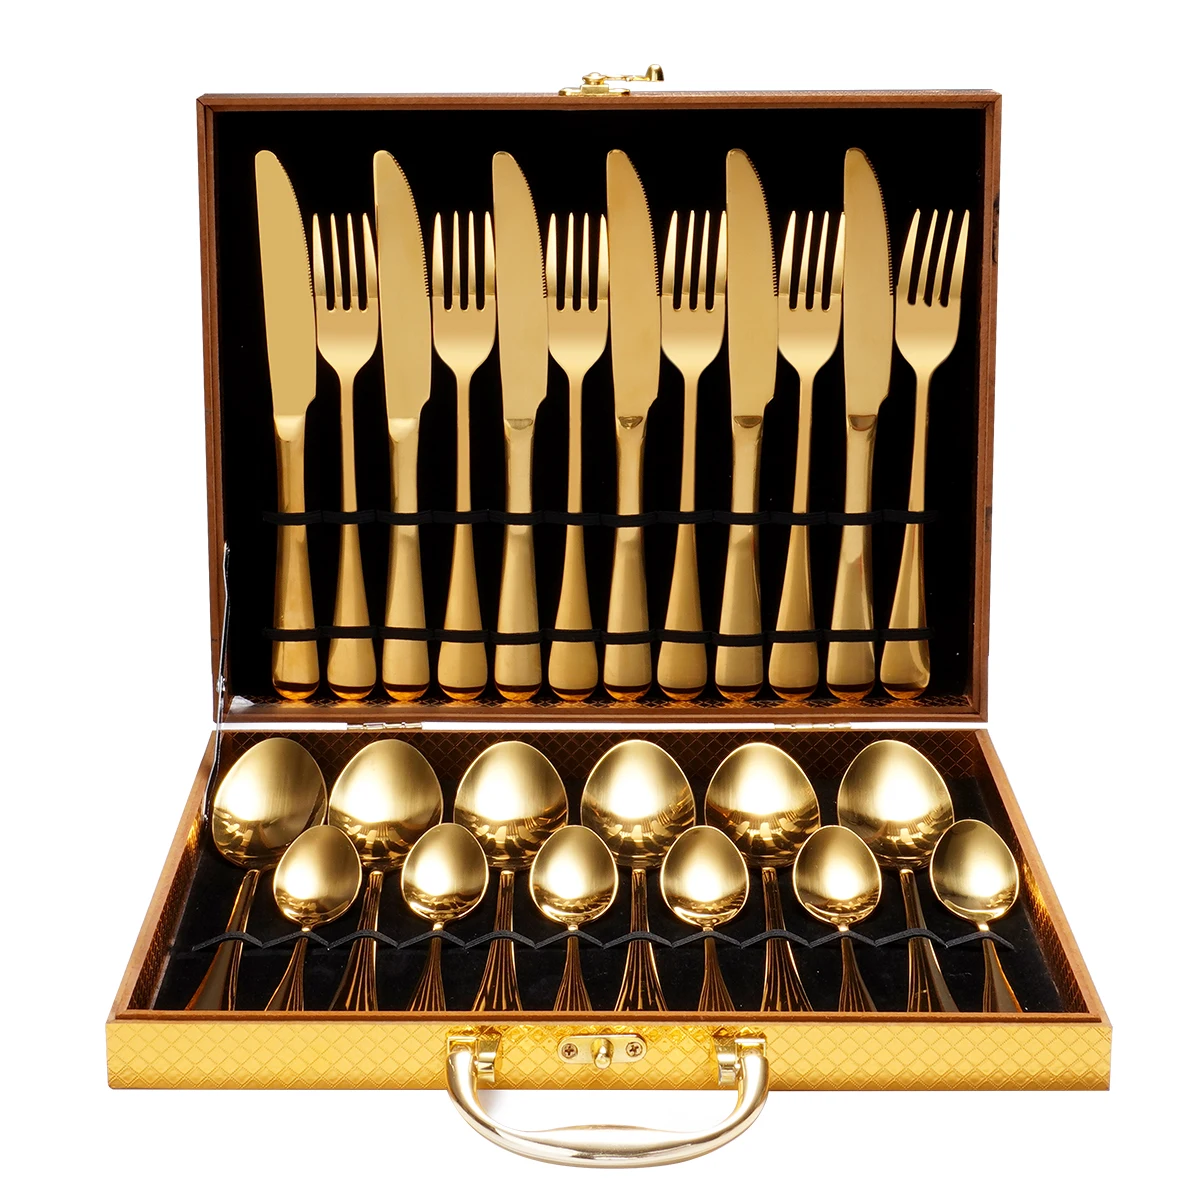 

24pcs Stainless Steel Flatware Gift With Box Reusable Wedding Gift Spoon Fork Luxury Black Silverware Gold Cutlery Set, Silver, gold, customizable